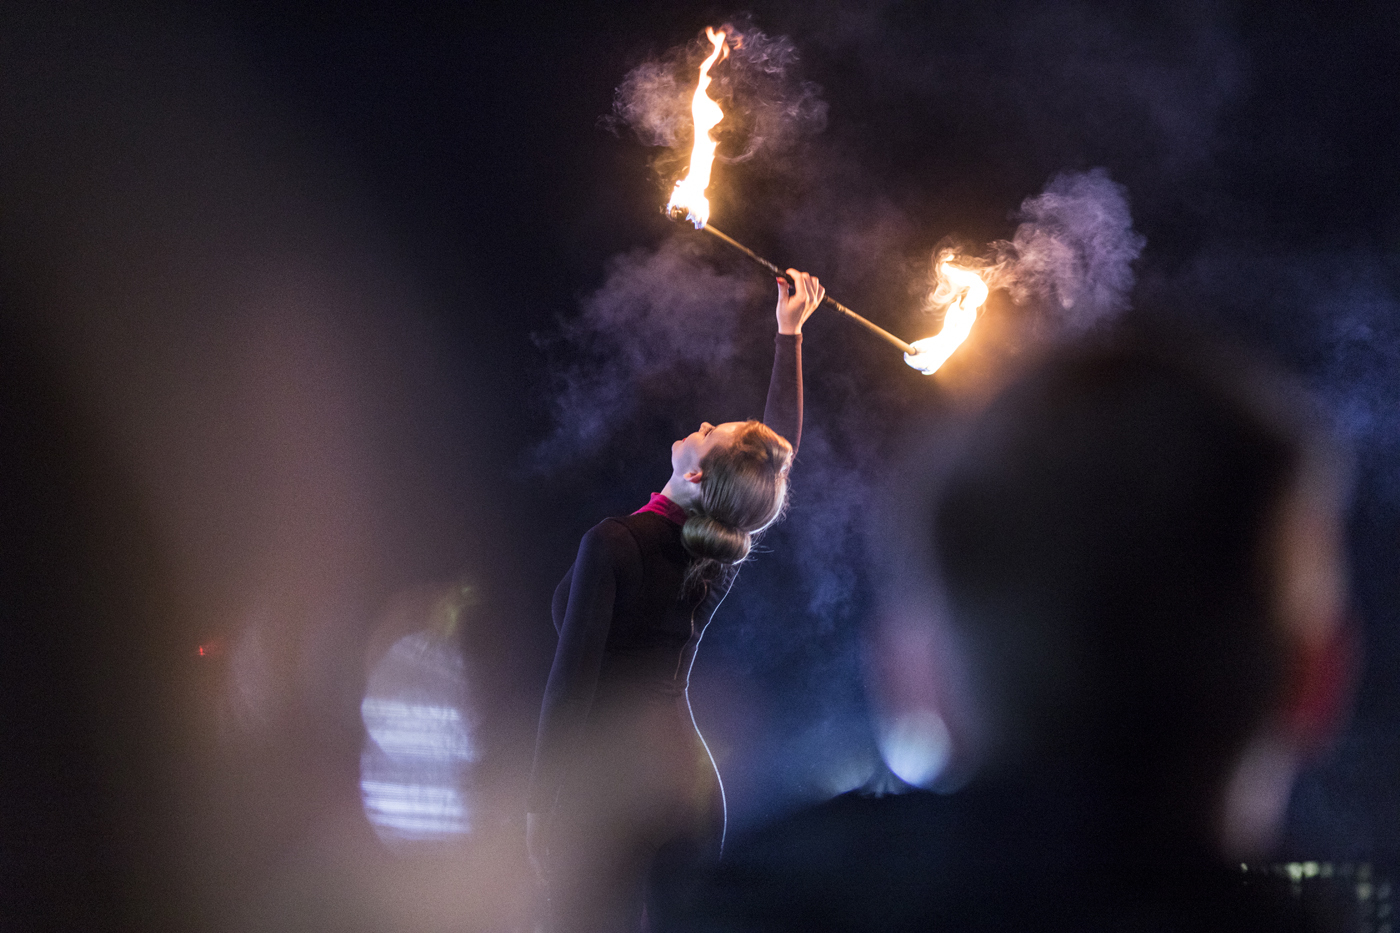 Dancer holding stick with flames at either end